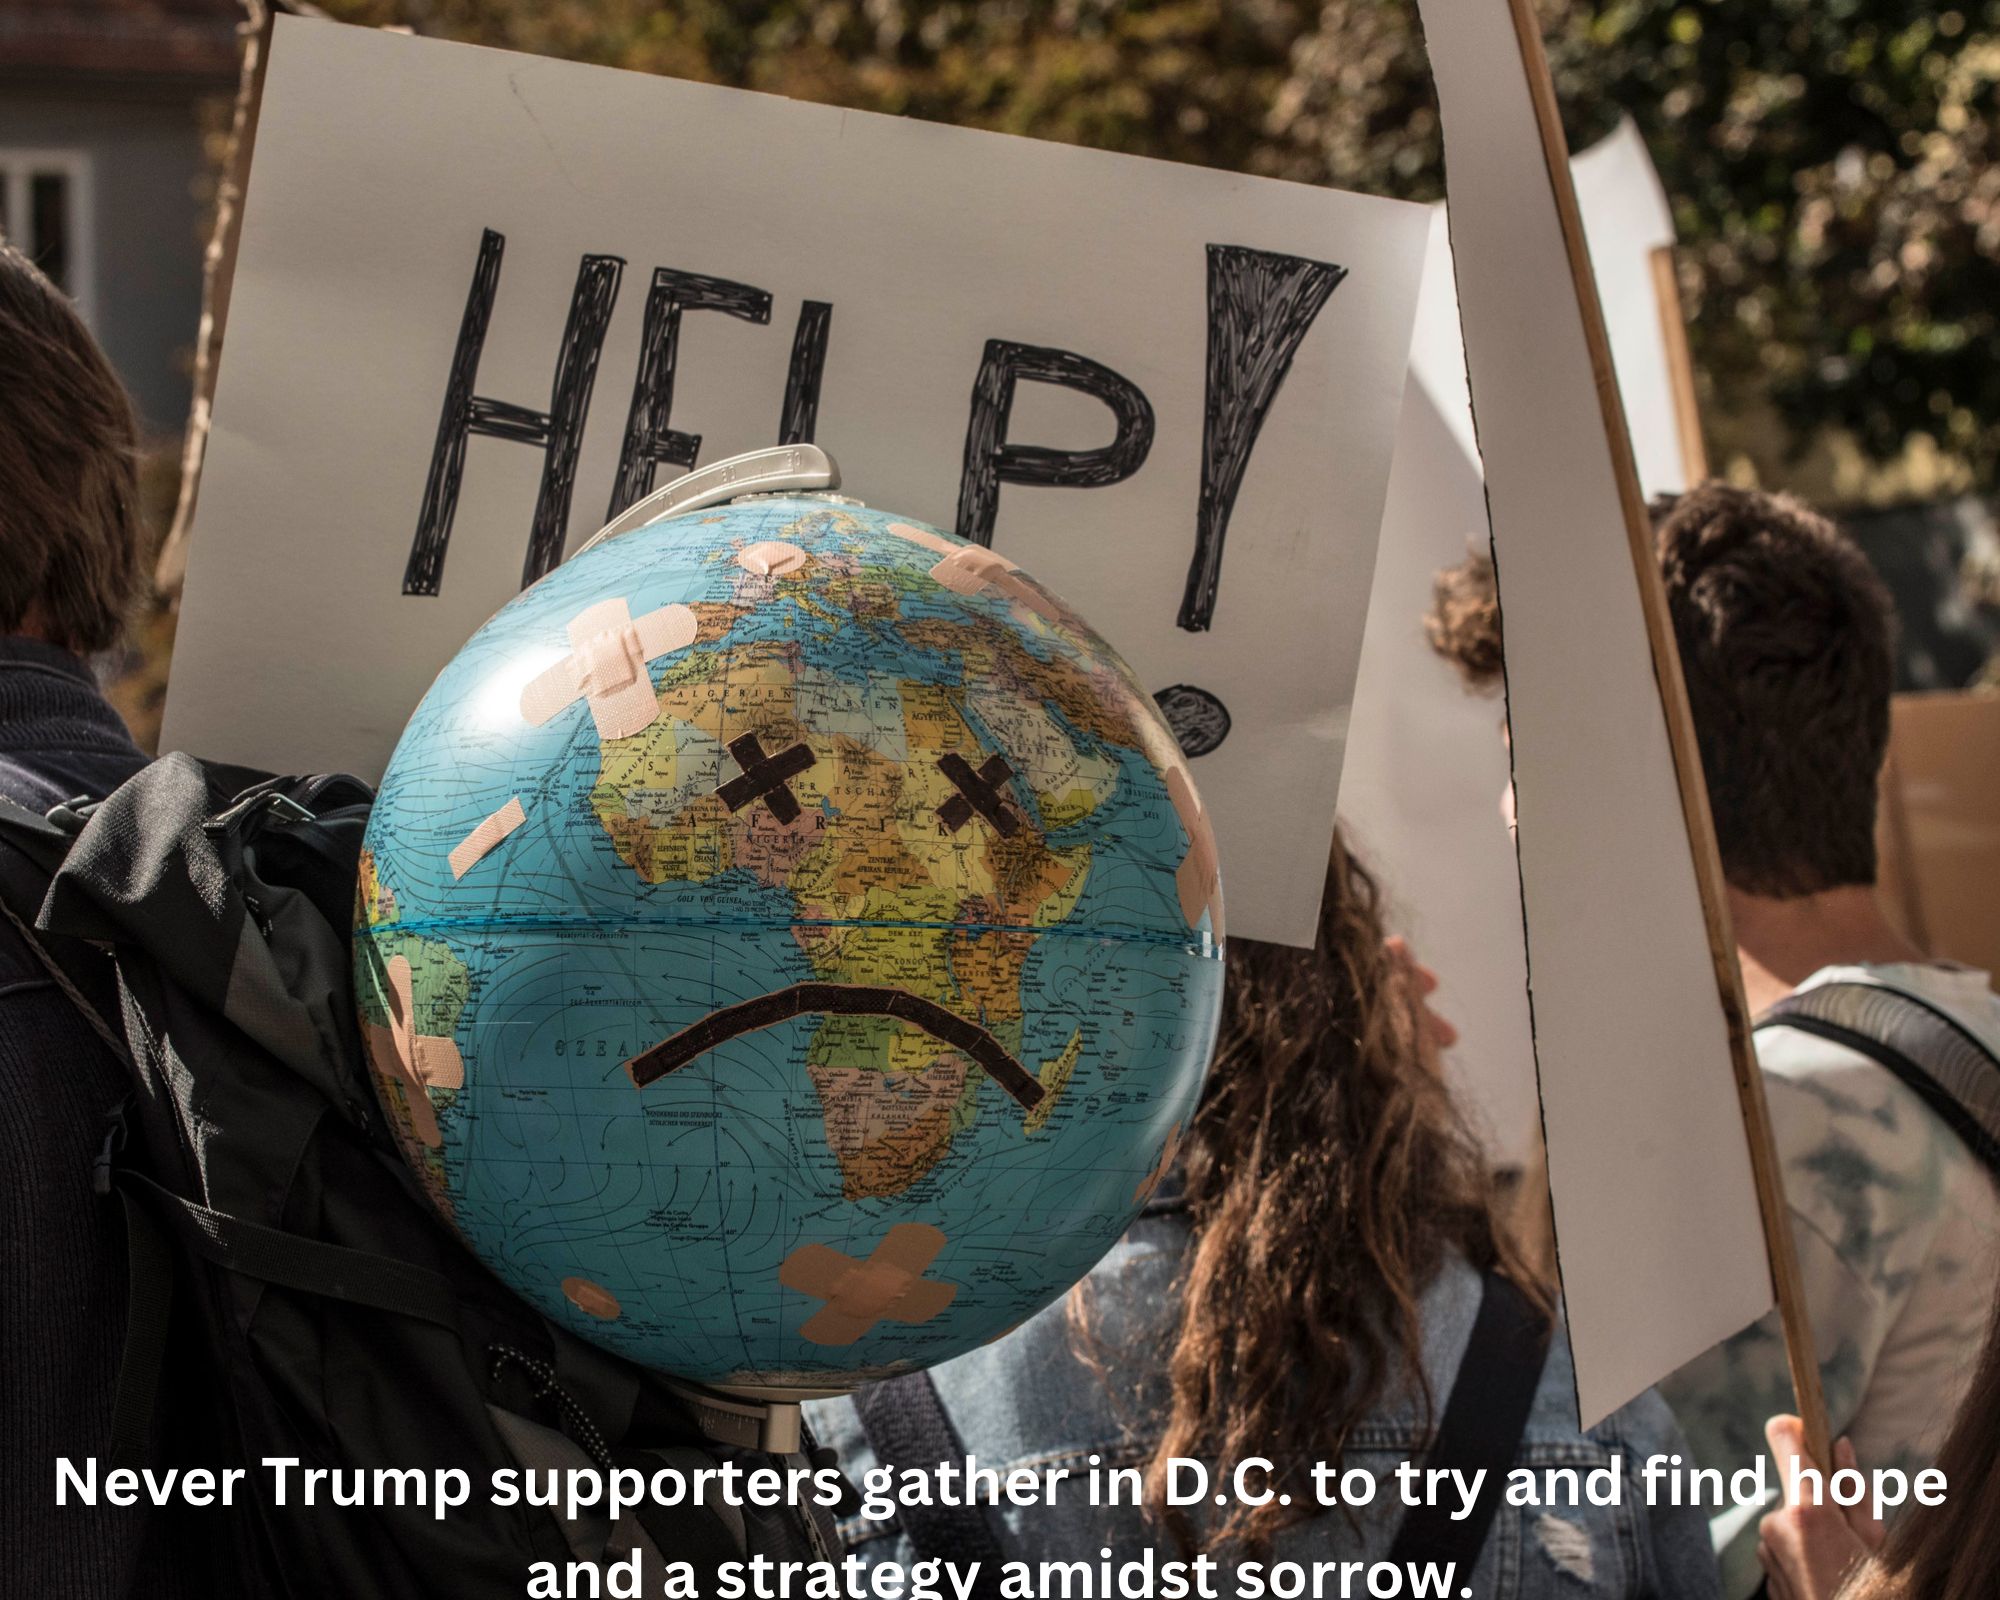 Never Trump supporters gather in D.C. to try and find hope and a strategy amidst sorrow.